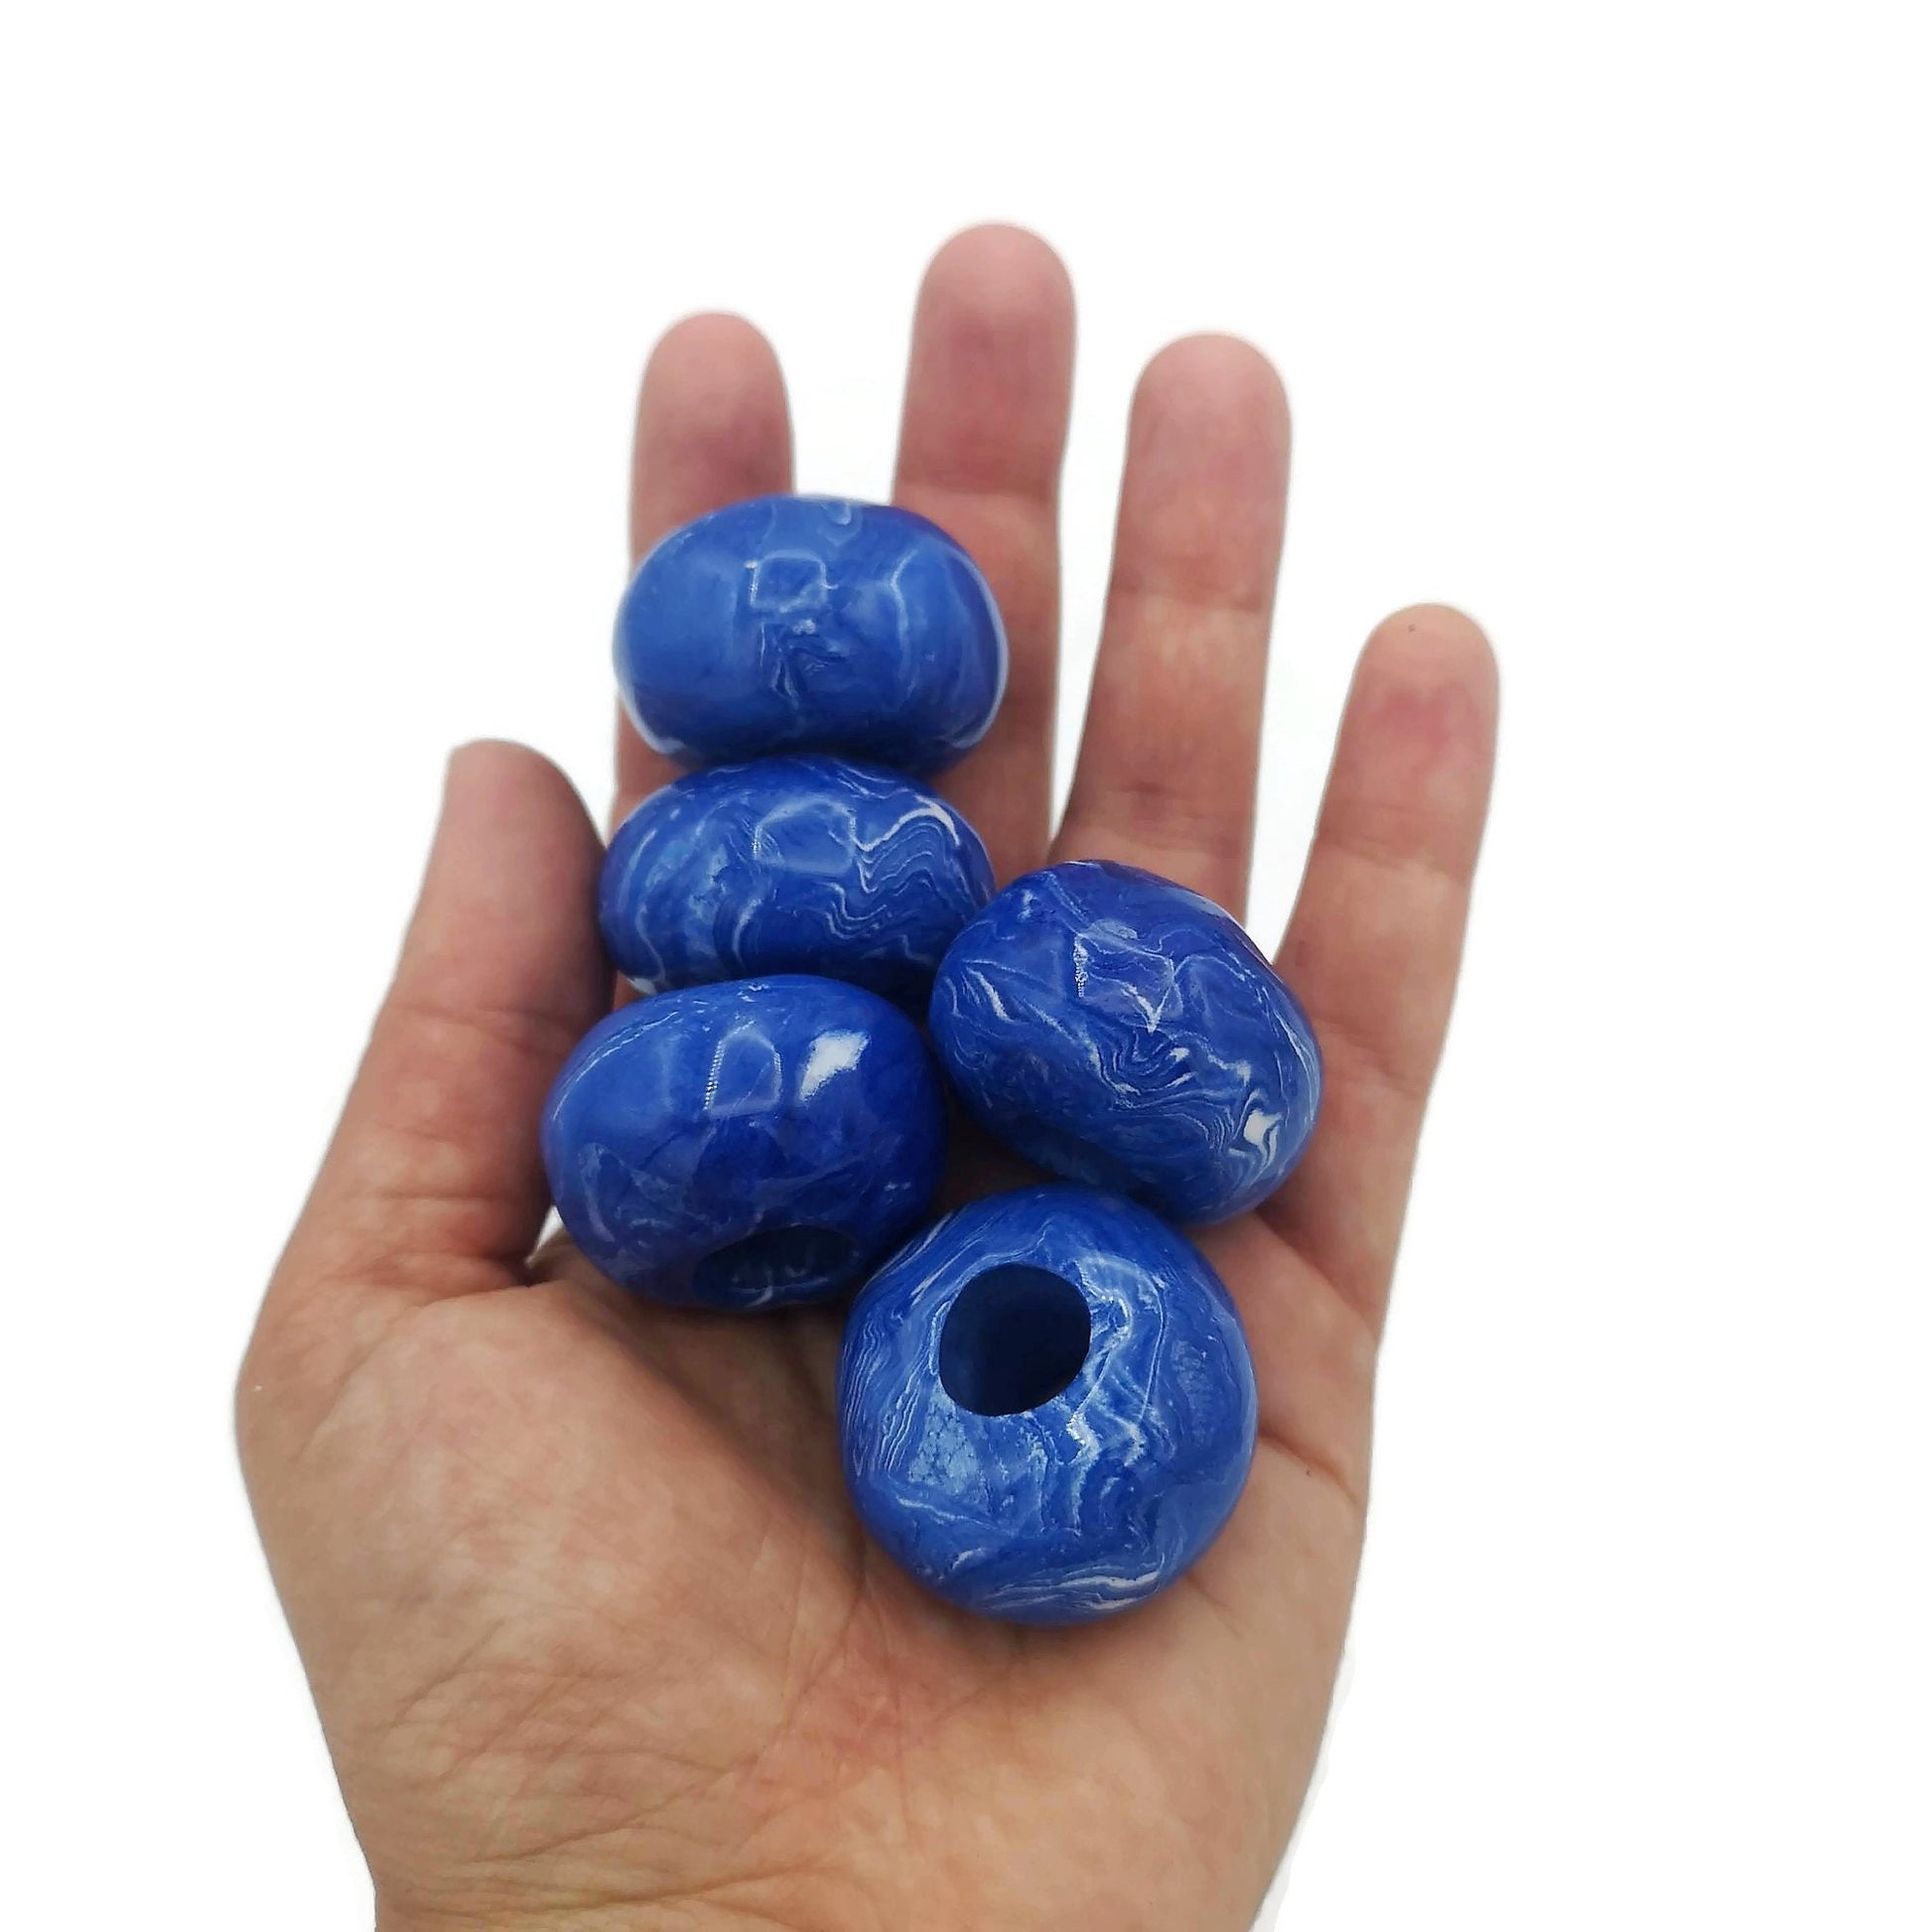 5Pc Large Ceramic Beads For Macrame and Statement Jewelry Making, Marbled White and Blue Clay Beads With Large Holes - Ceramica Ana Rafael